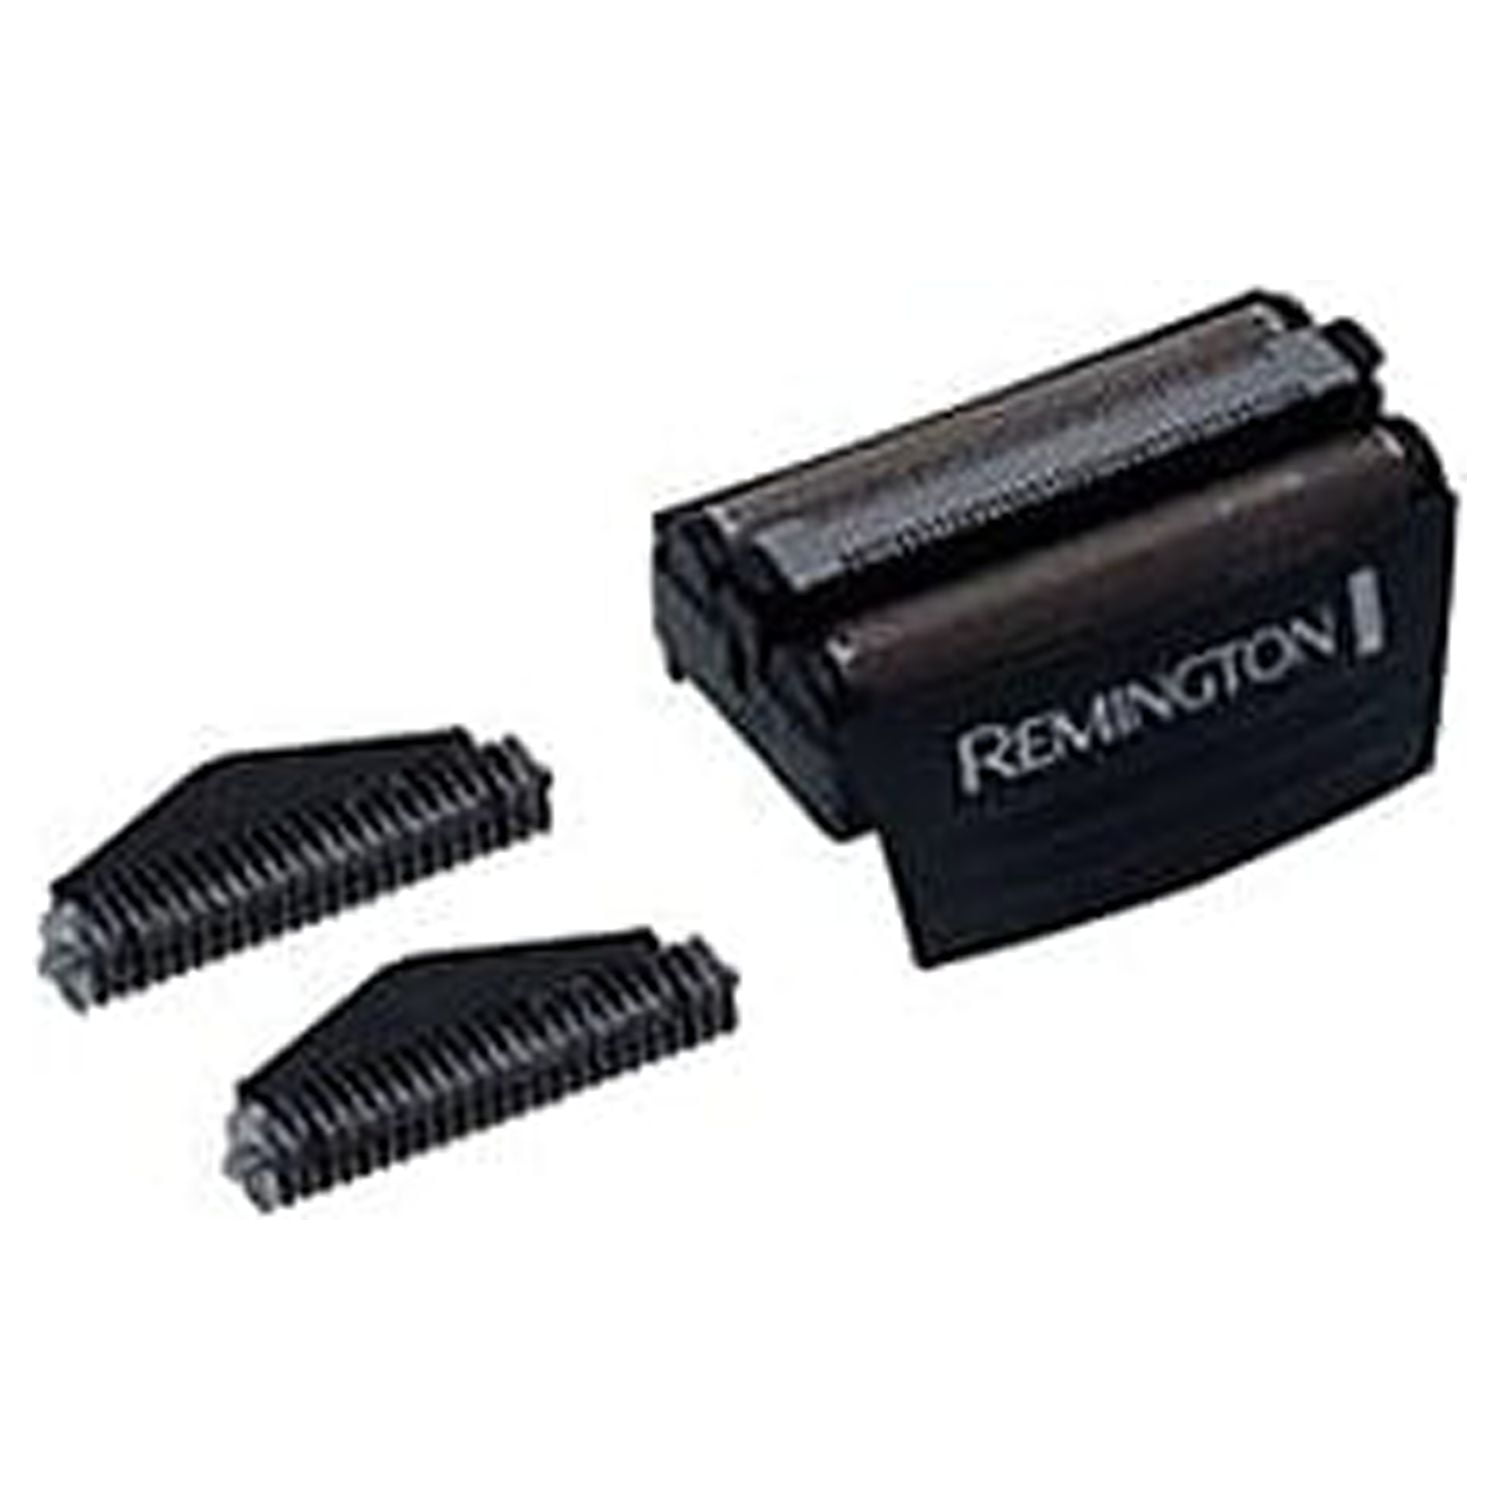 Remington Shavers Replacement and Screens Cutters (SPF300) Black